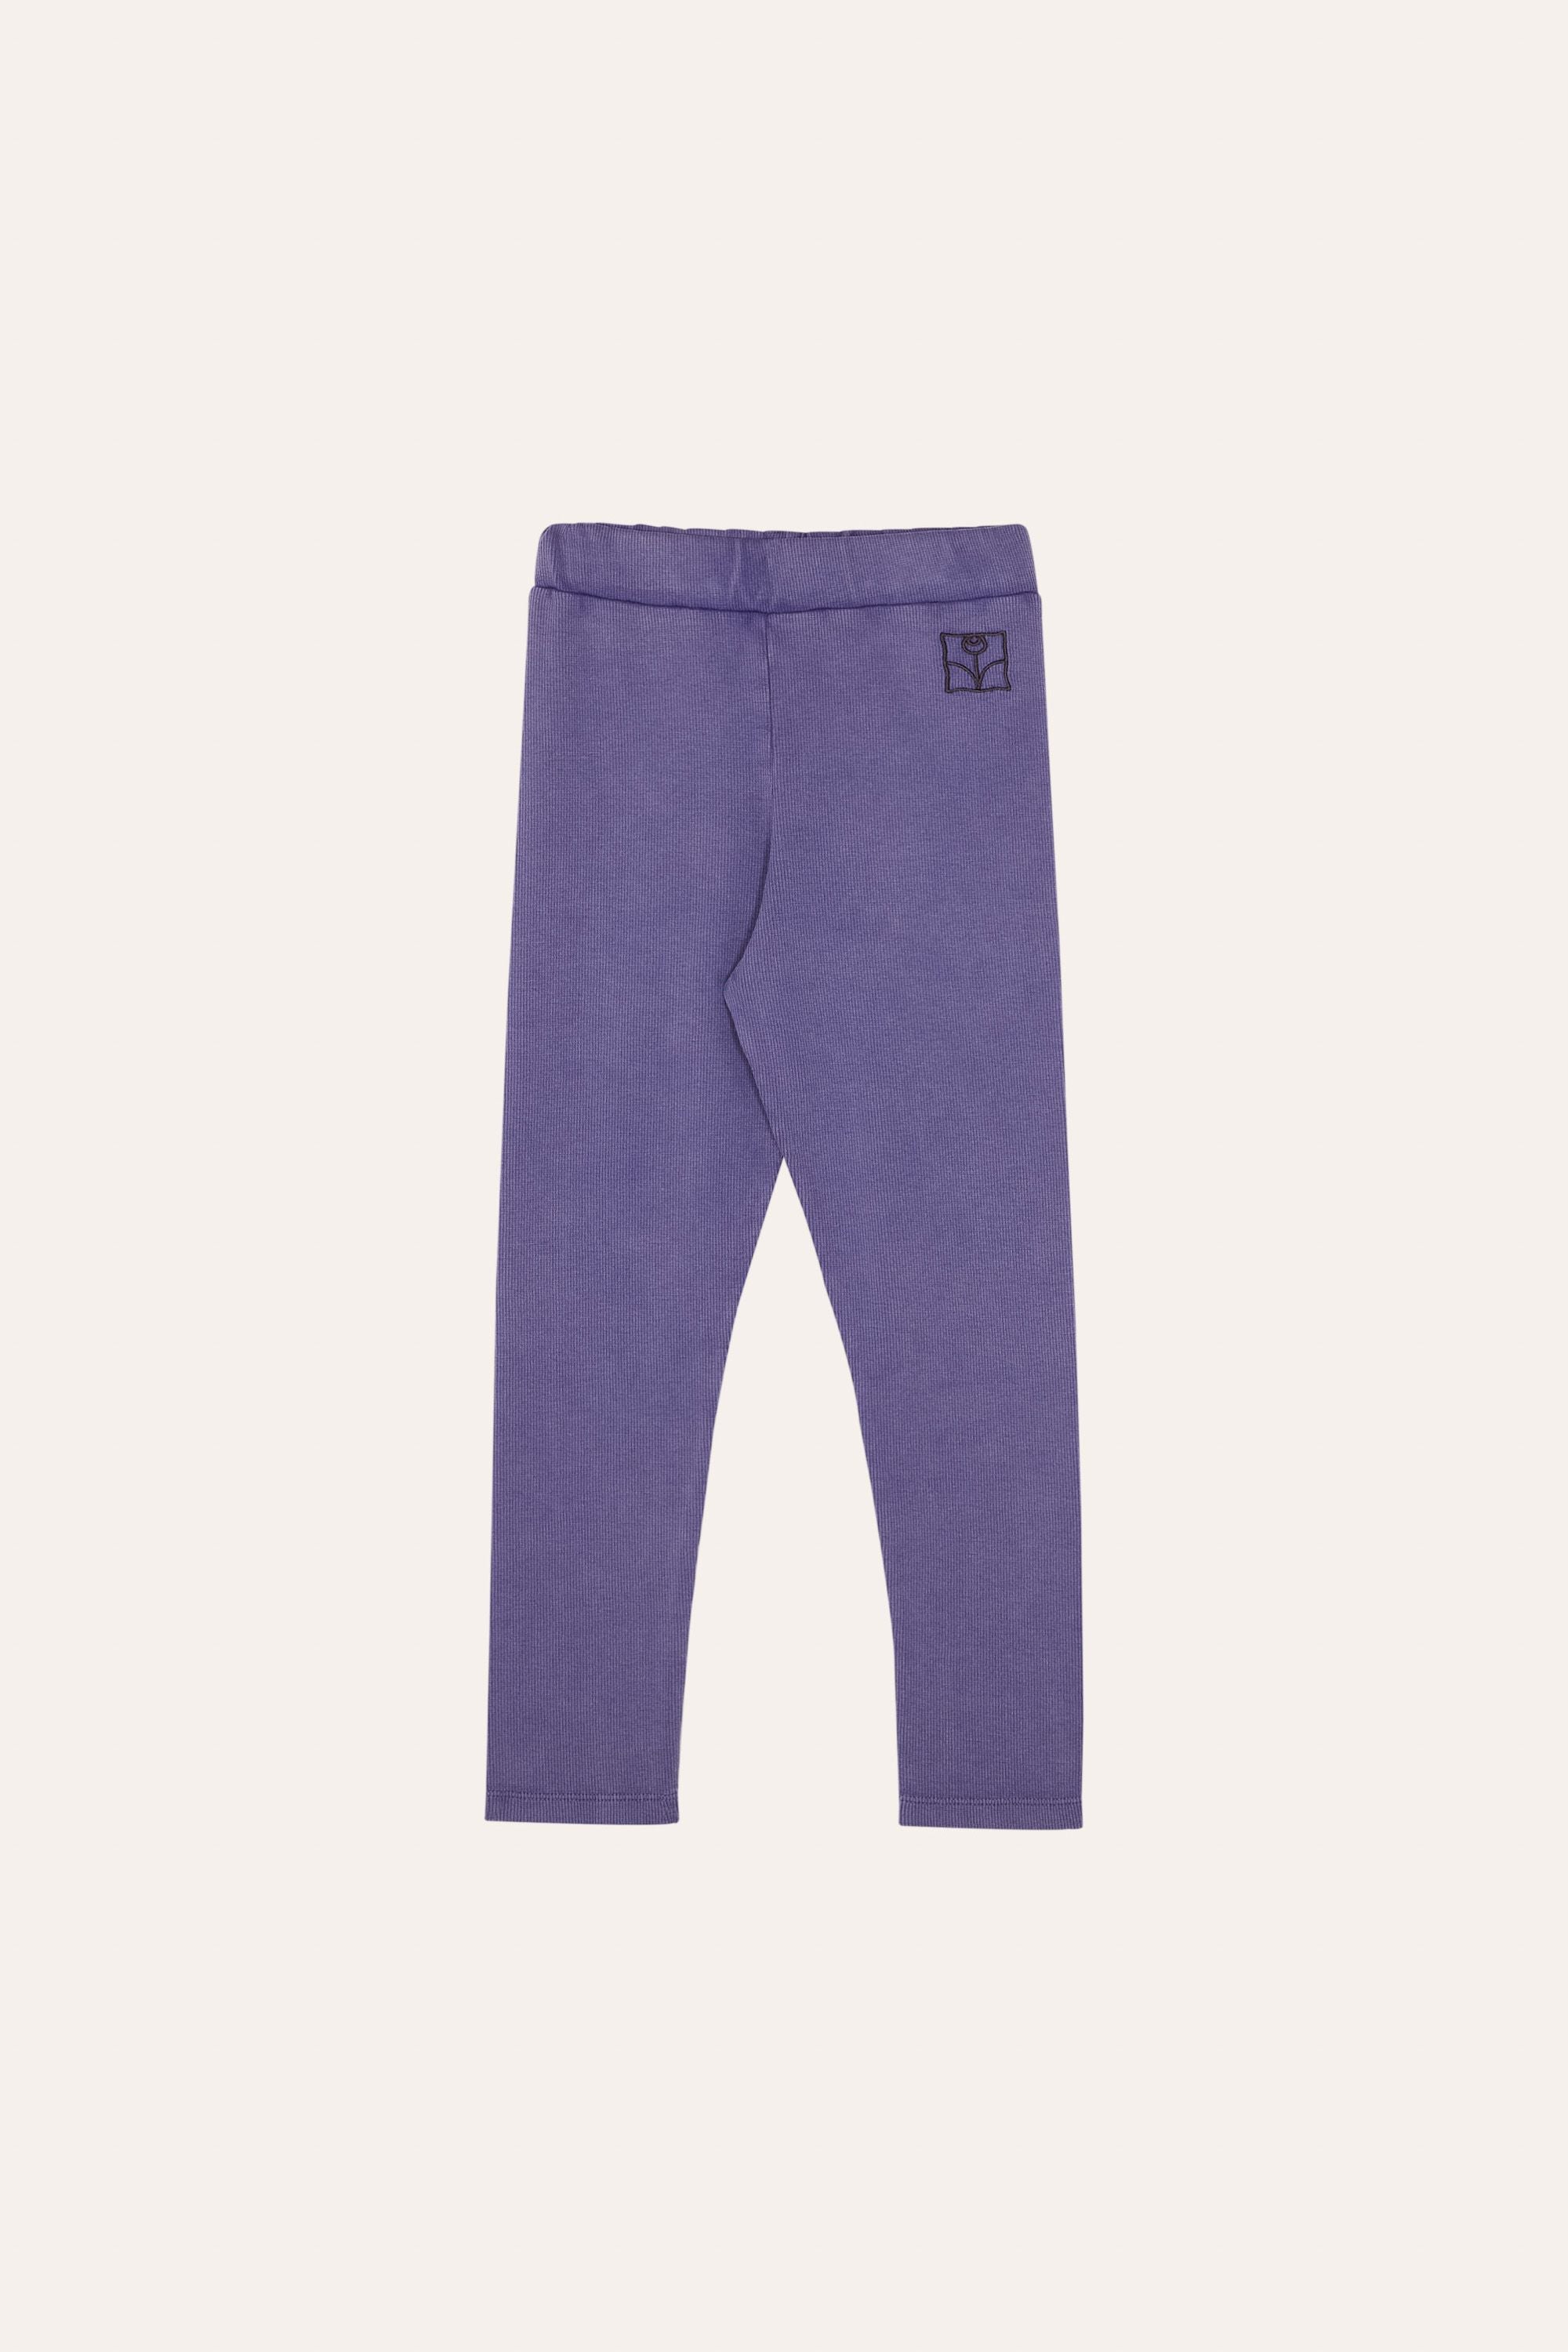 The Campamento - Blue washed kids leggings